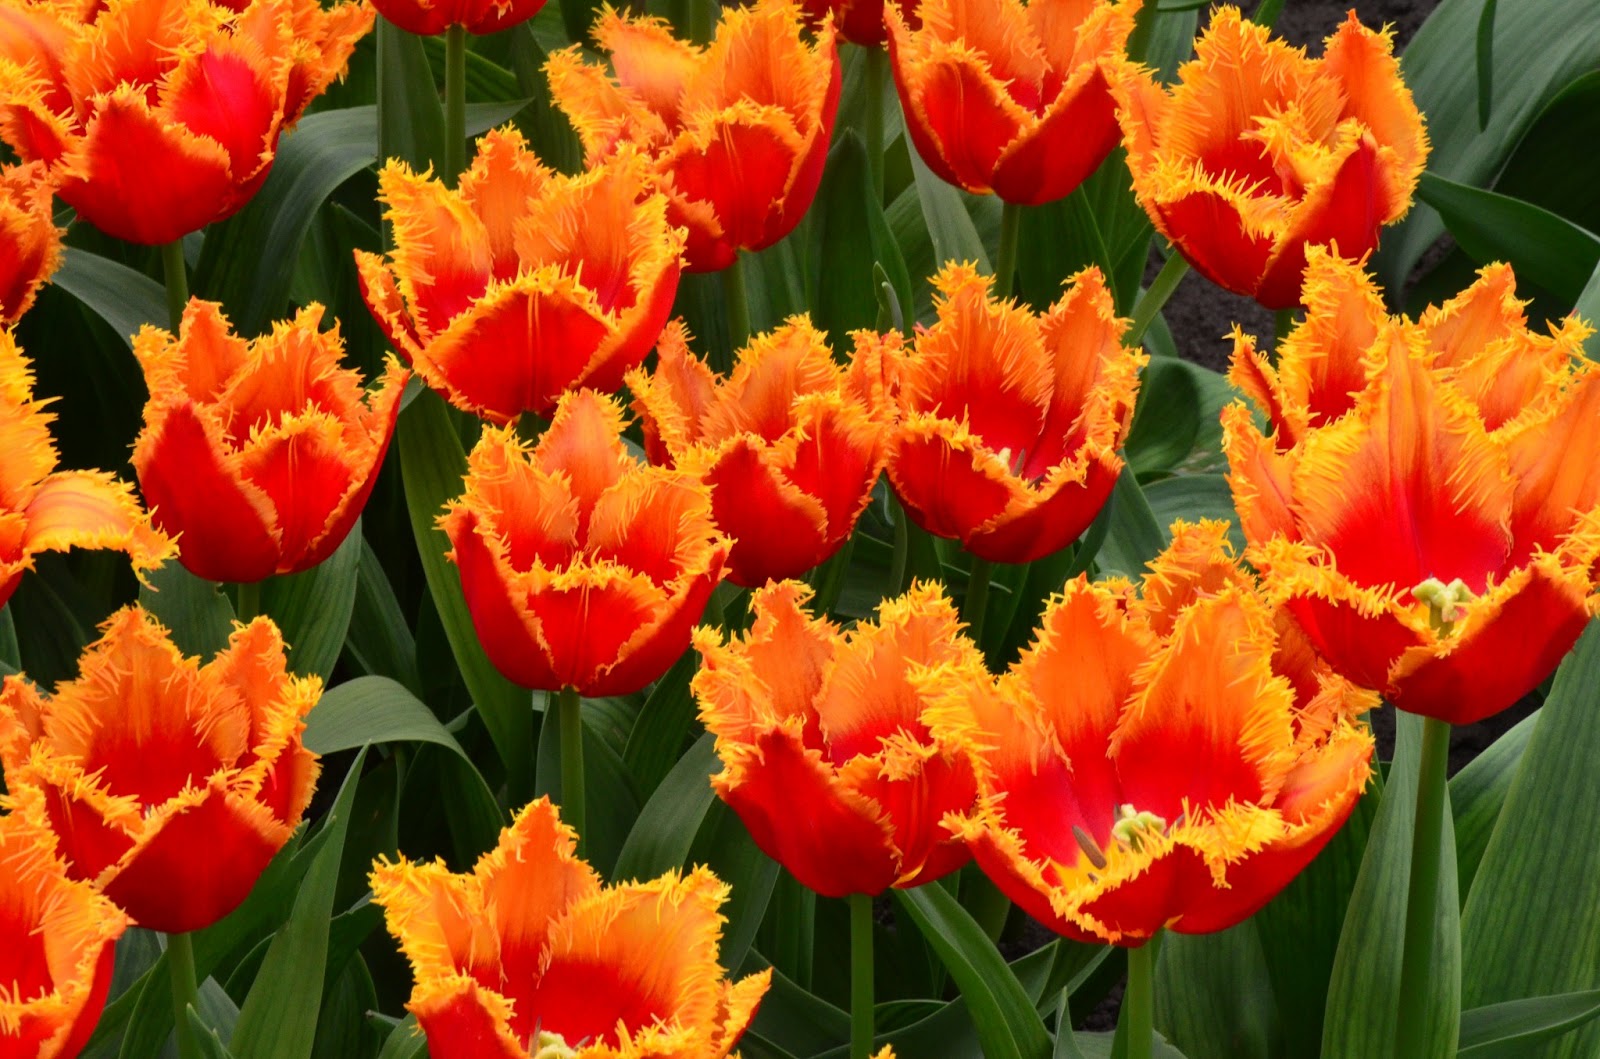 Our Adventures in England: Tulips in Holland